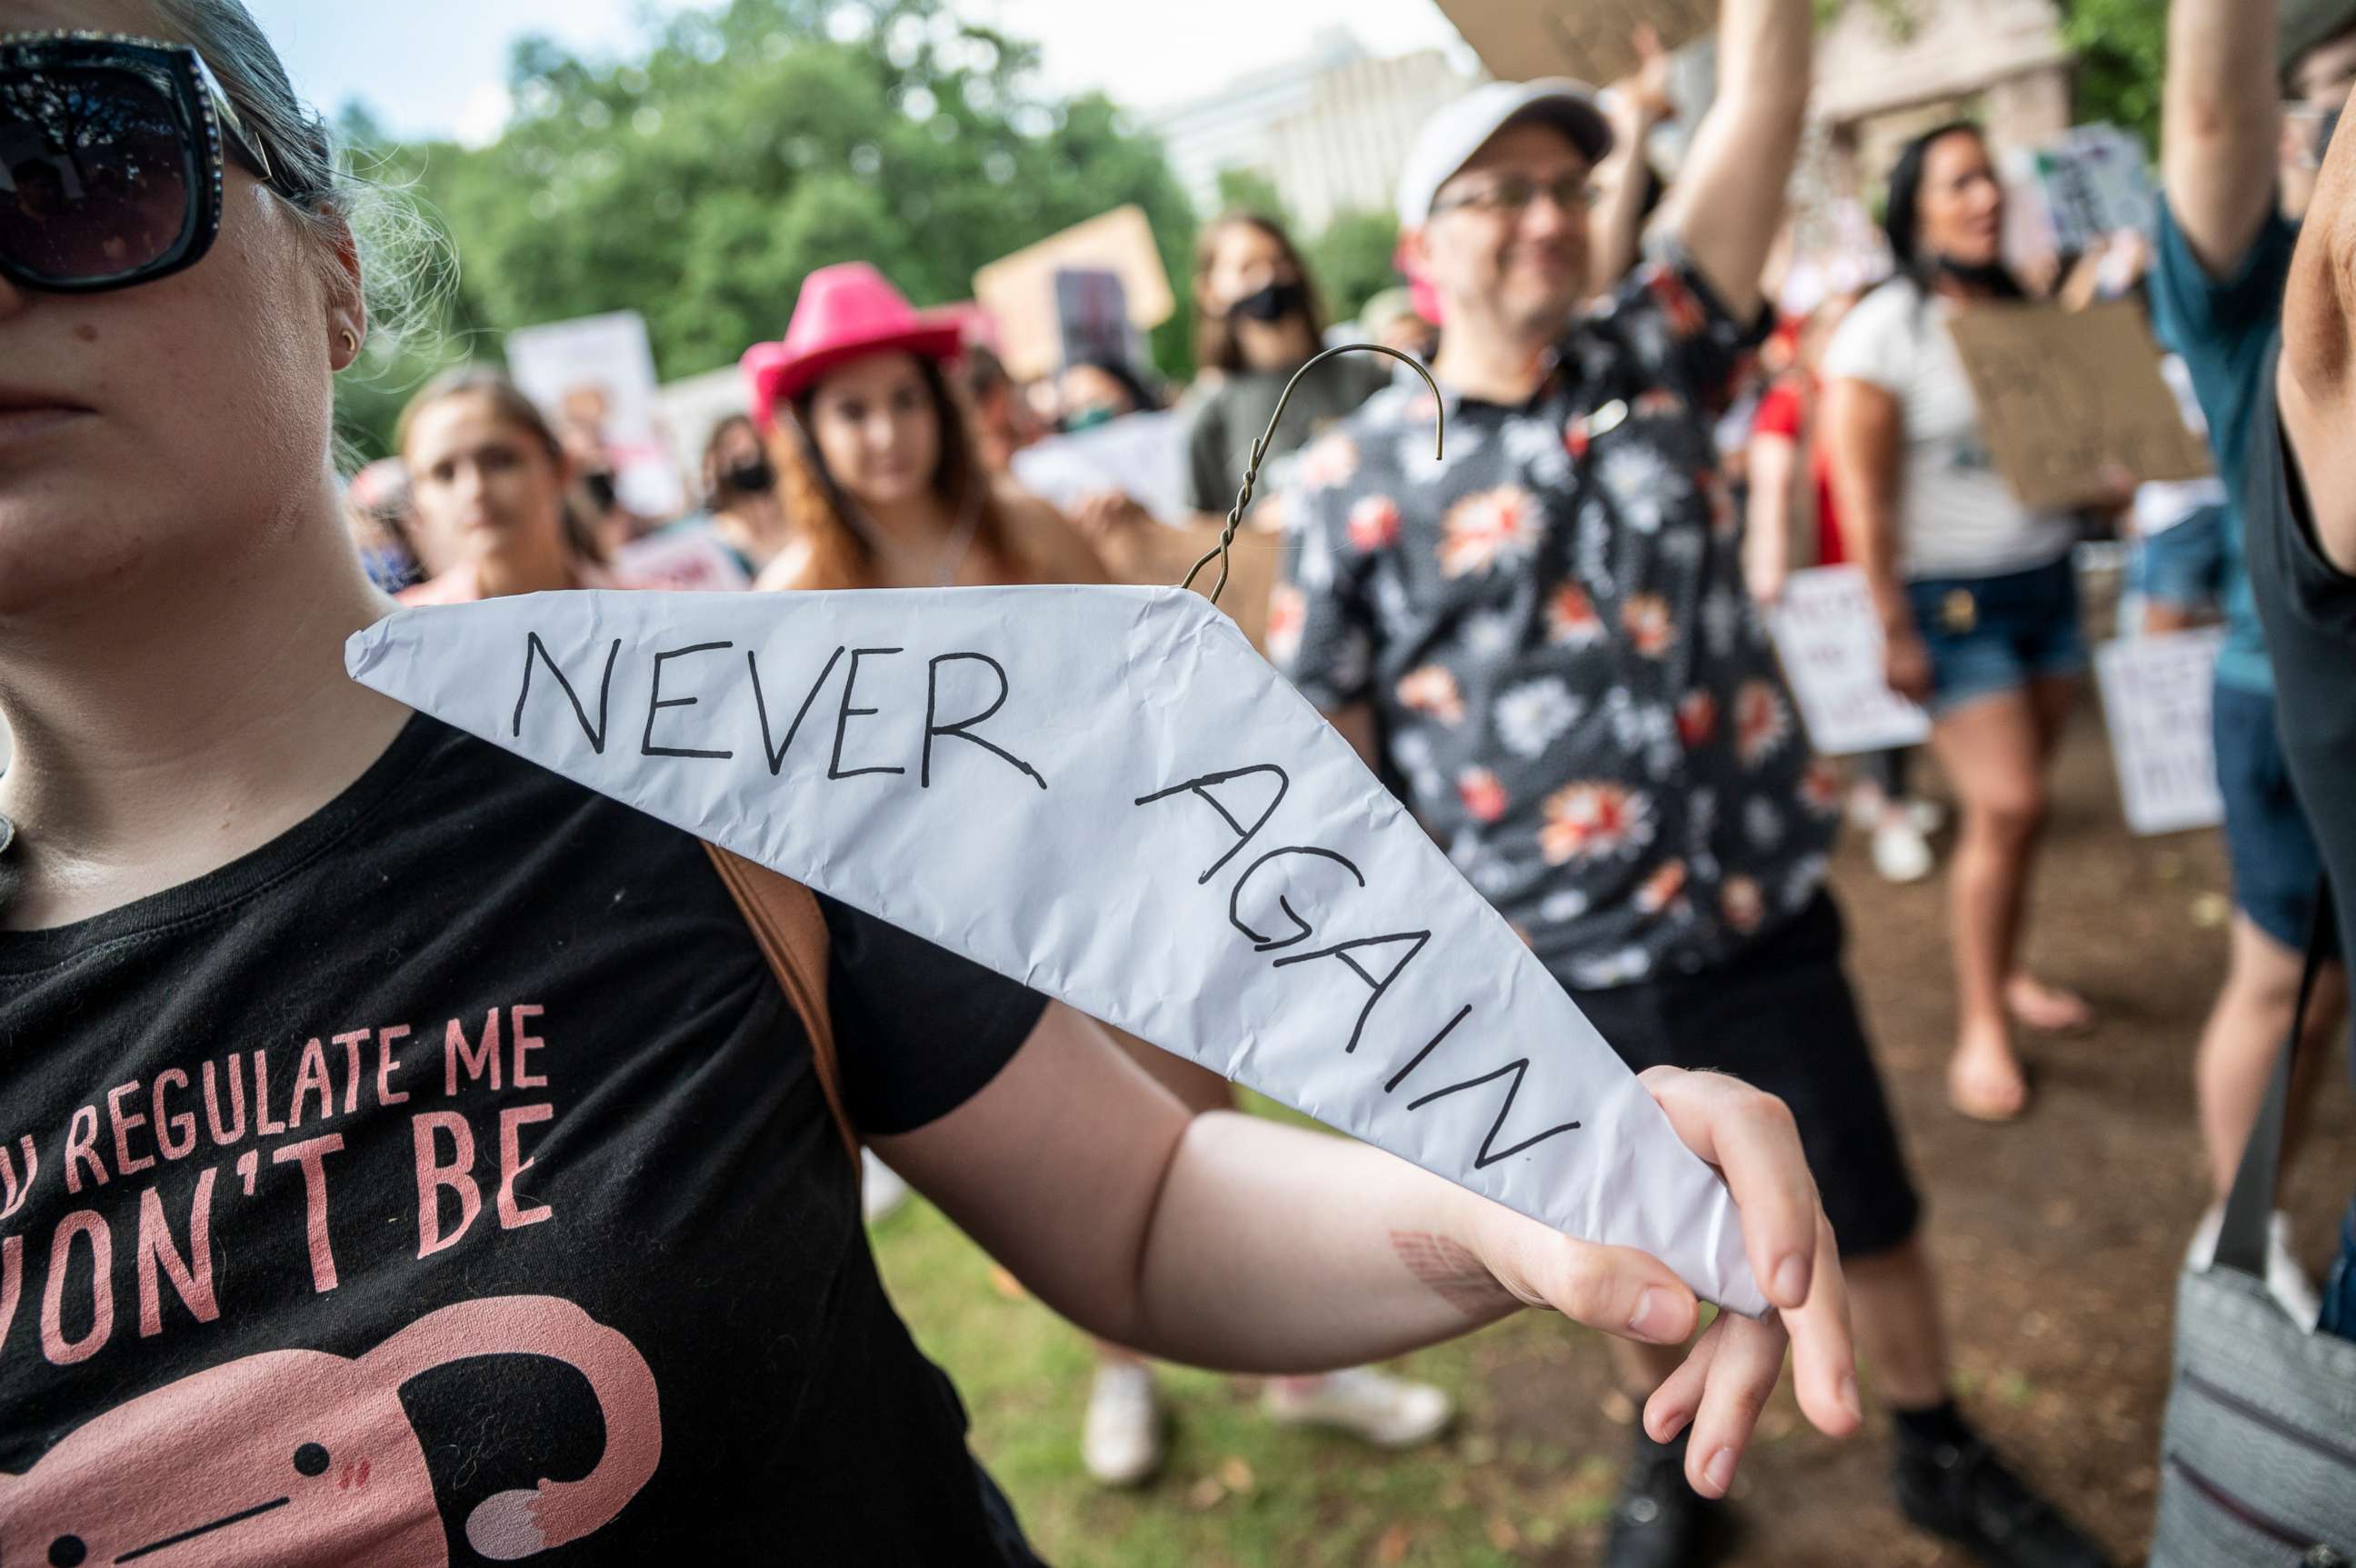 PHOTO: A woman holds a clothes hanger wrapped in paper with "Never again" written on it at a protest for abortion rights outside the Texas state capitol on May 29, 2021, in Austin.